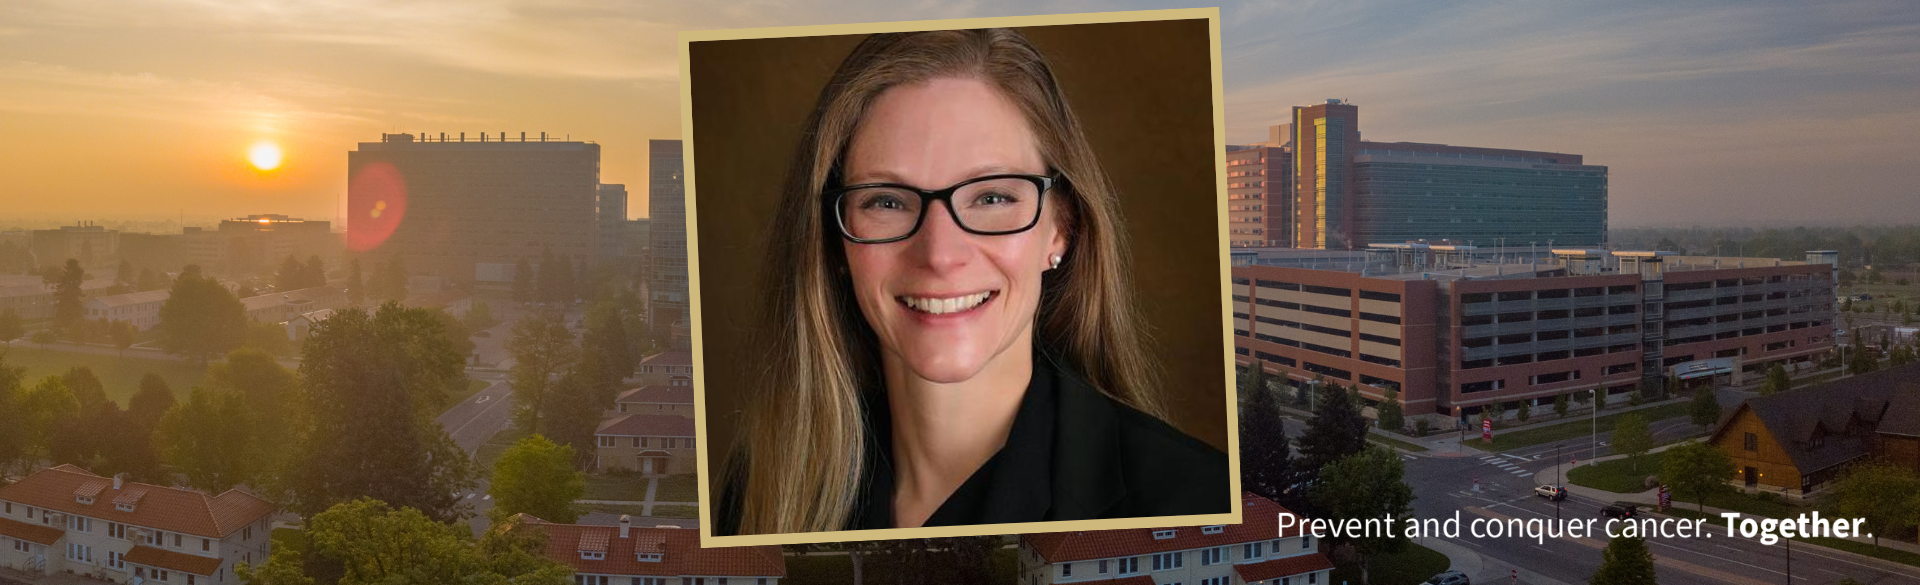 CU Cancer Center member Camille Stewart, MD, has been named to the 2023 cohort of the National Cancer Institute’s Early-Stage Surgeon Scientist Program.